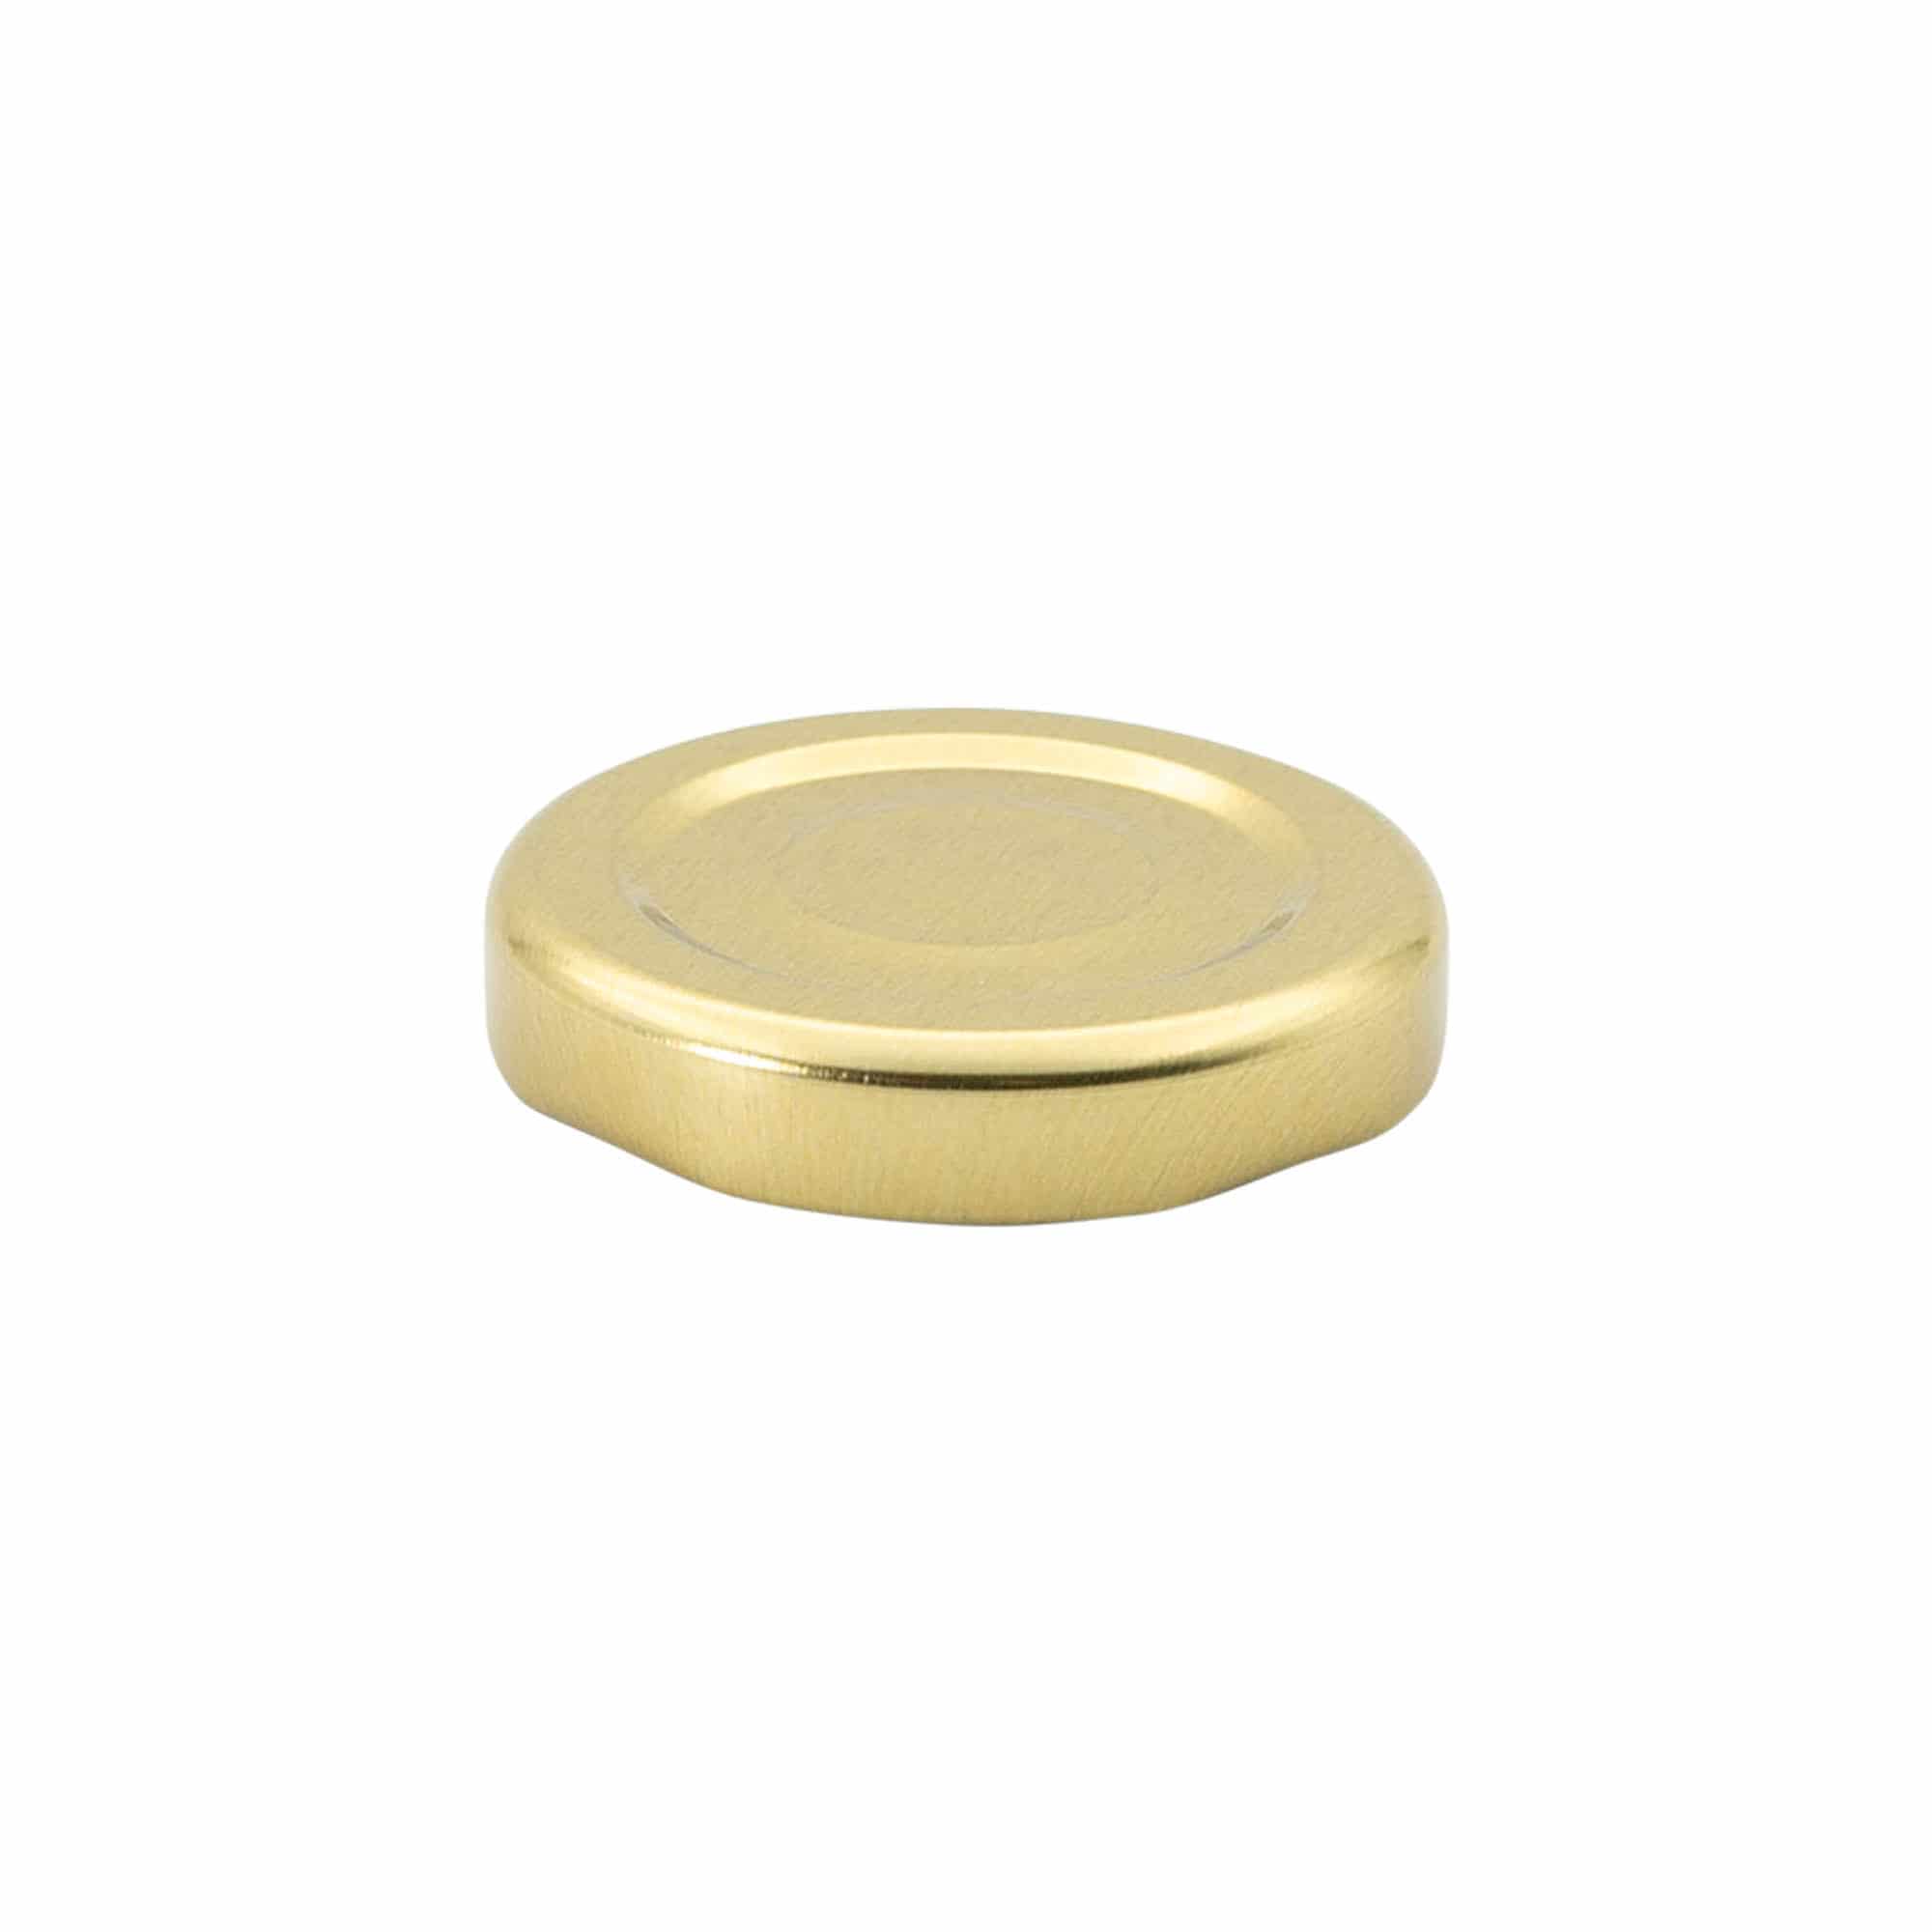 Twist off lid, tinplate, gold, for opening: TO 43